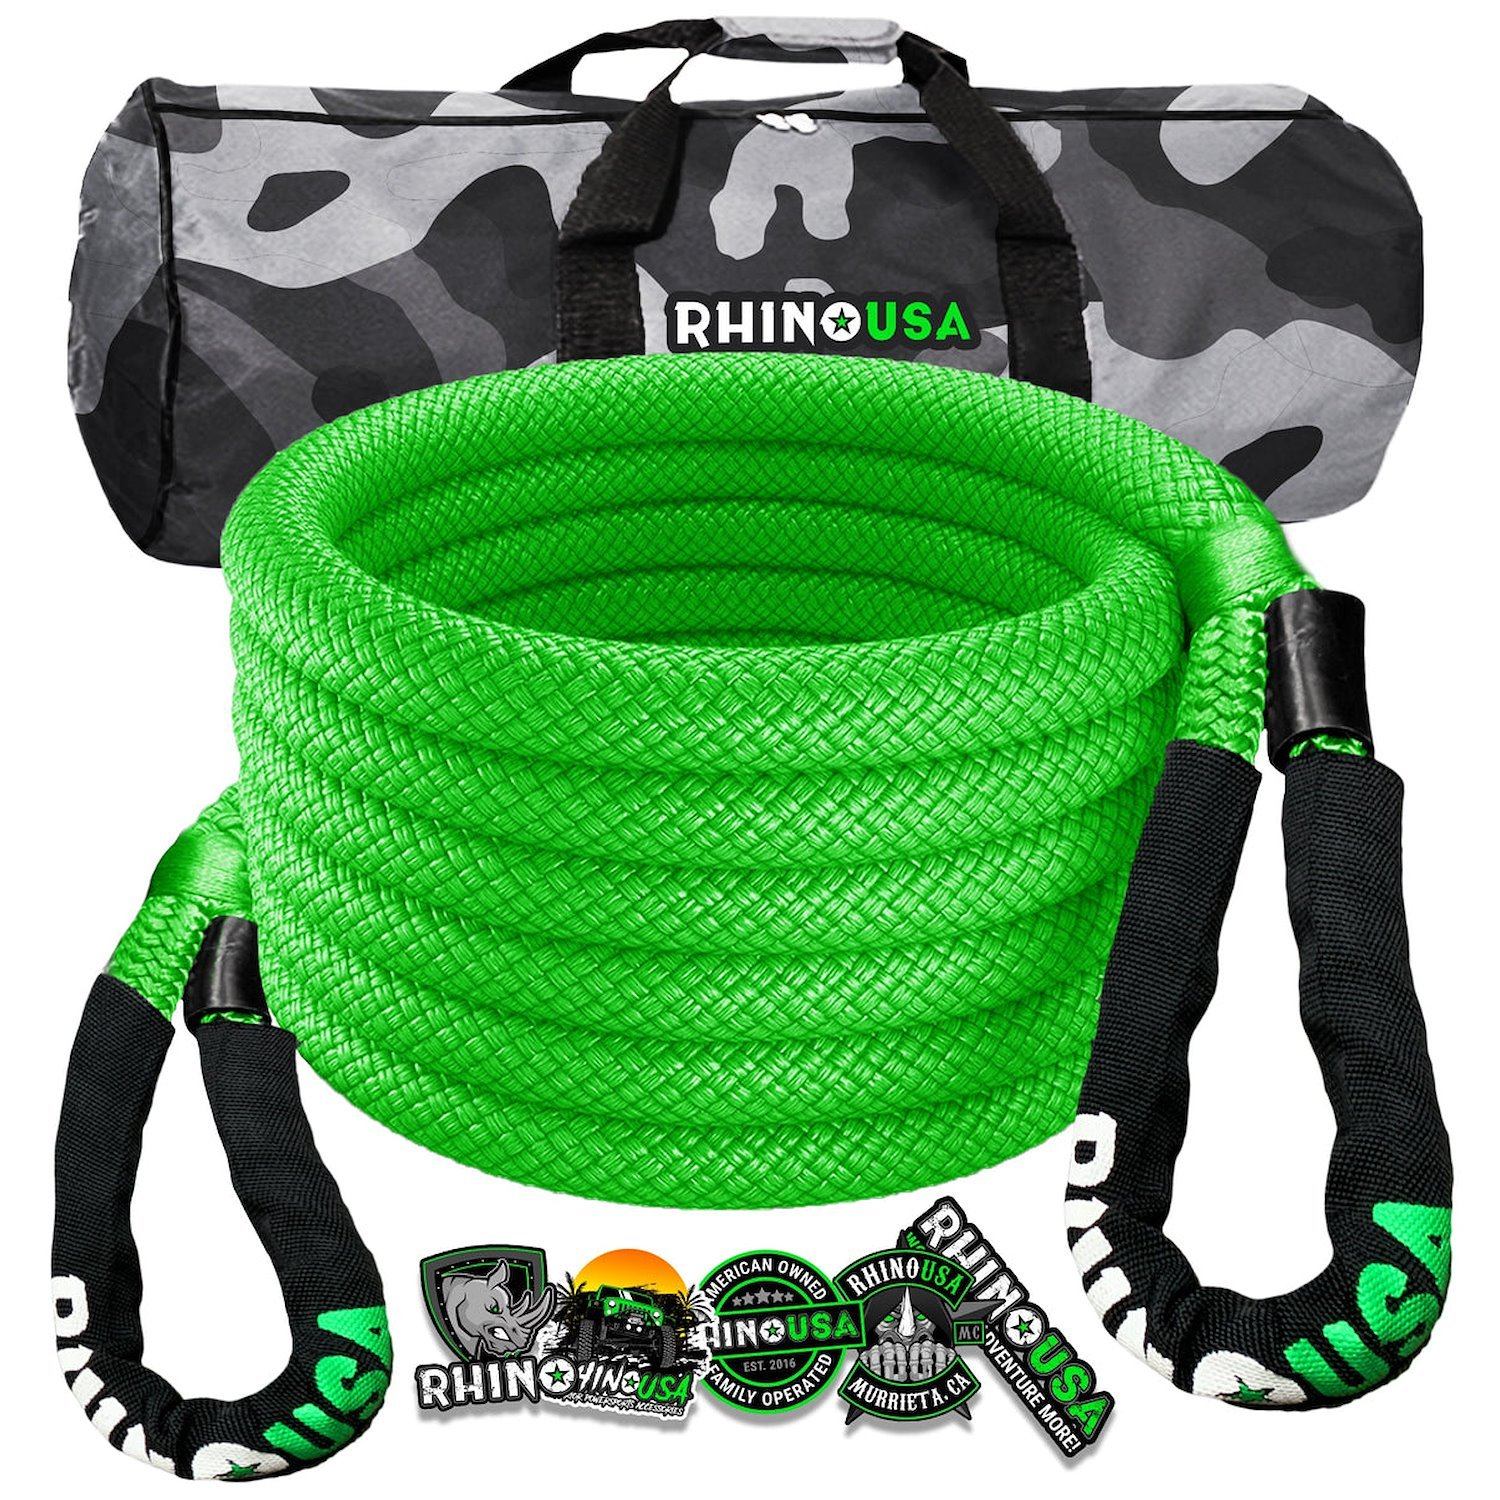 KROPE-78X20-GRN Kinetic Energy Recovery Rope [7/8 in. x 20 ft., Green]